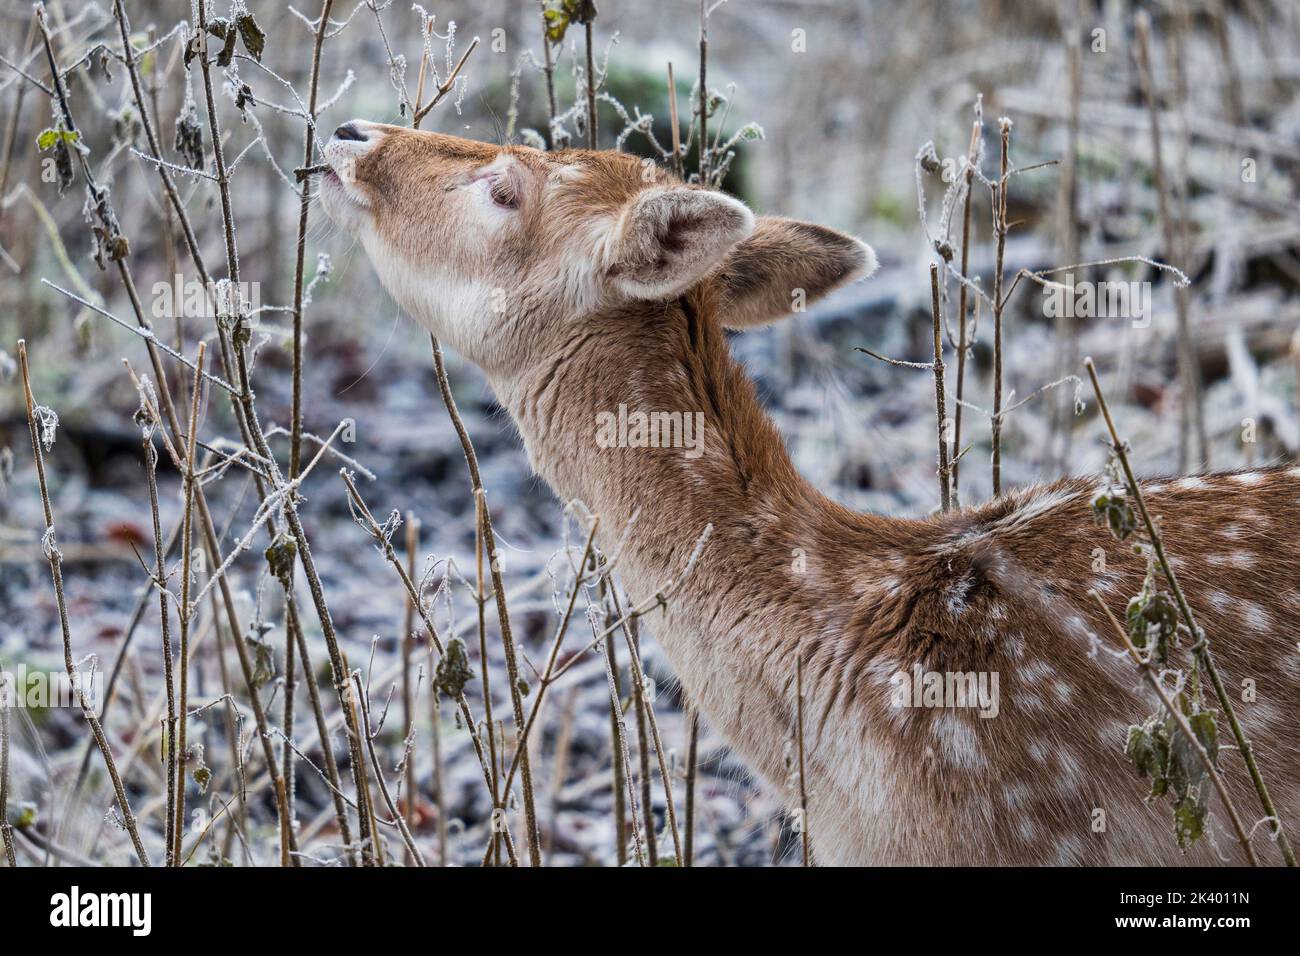 Portrait of a brown fawn with white dots nibbling on a branch in the forest Stock Photo